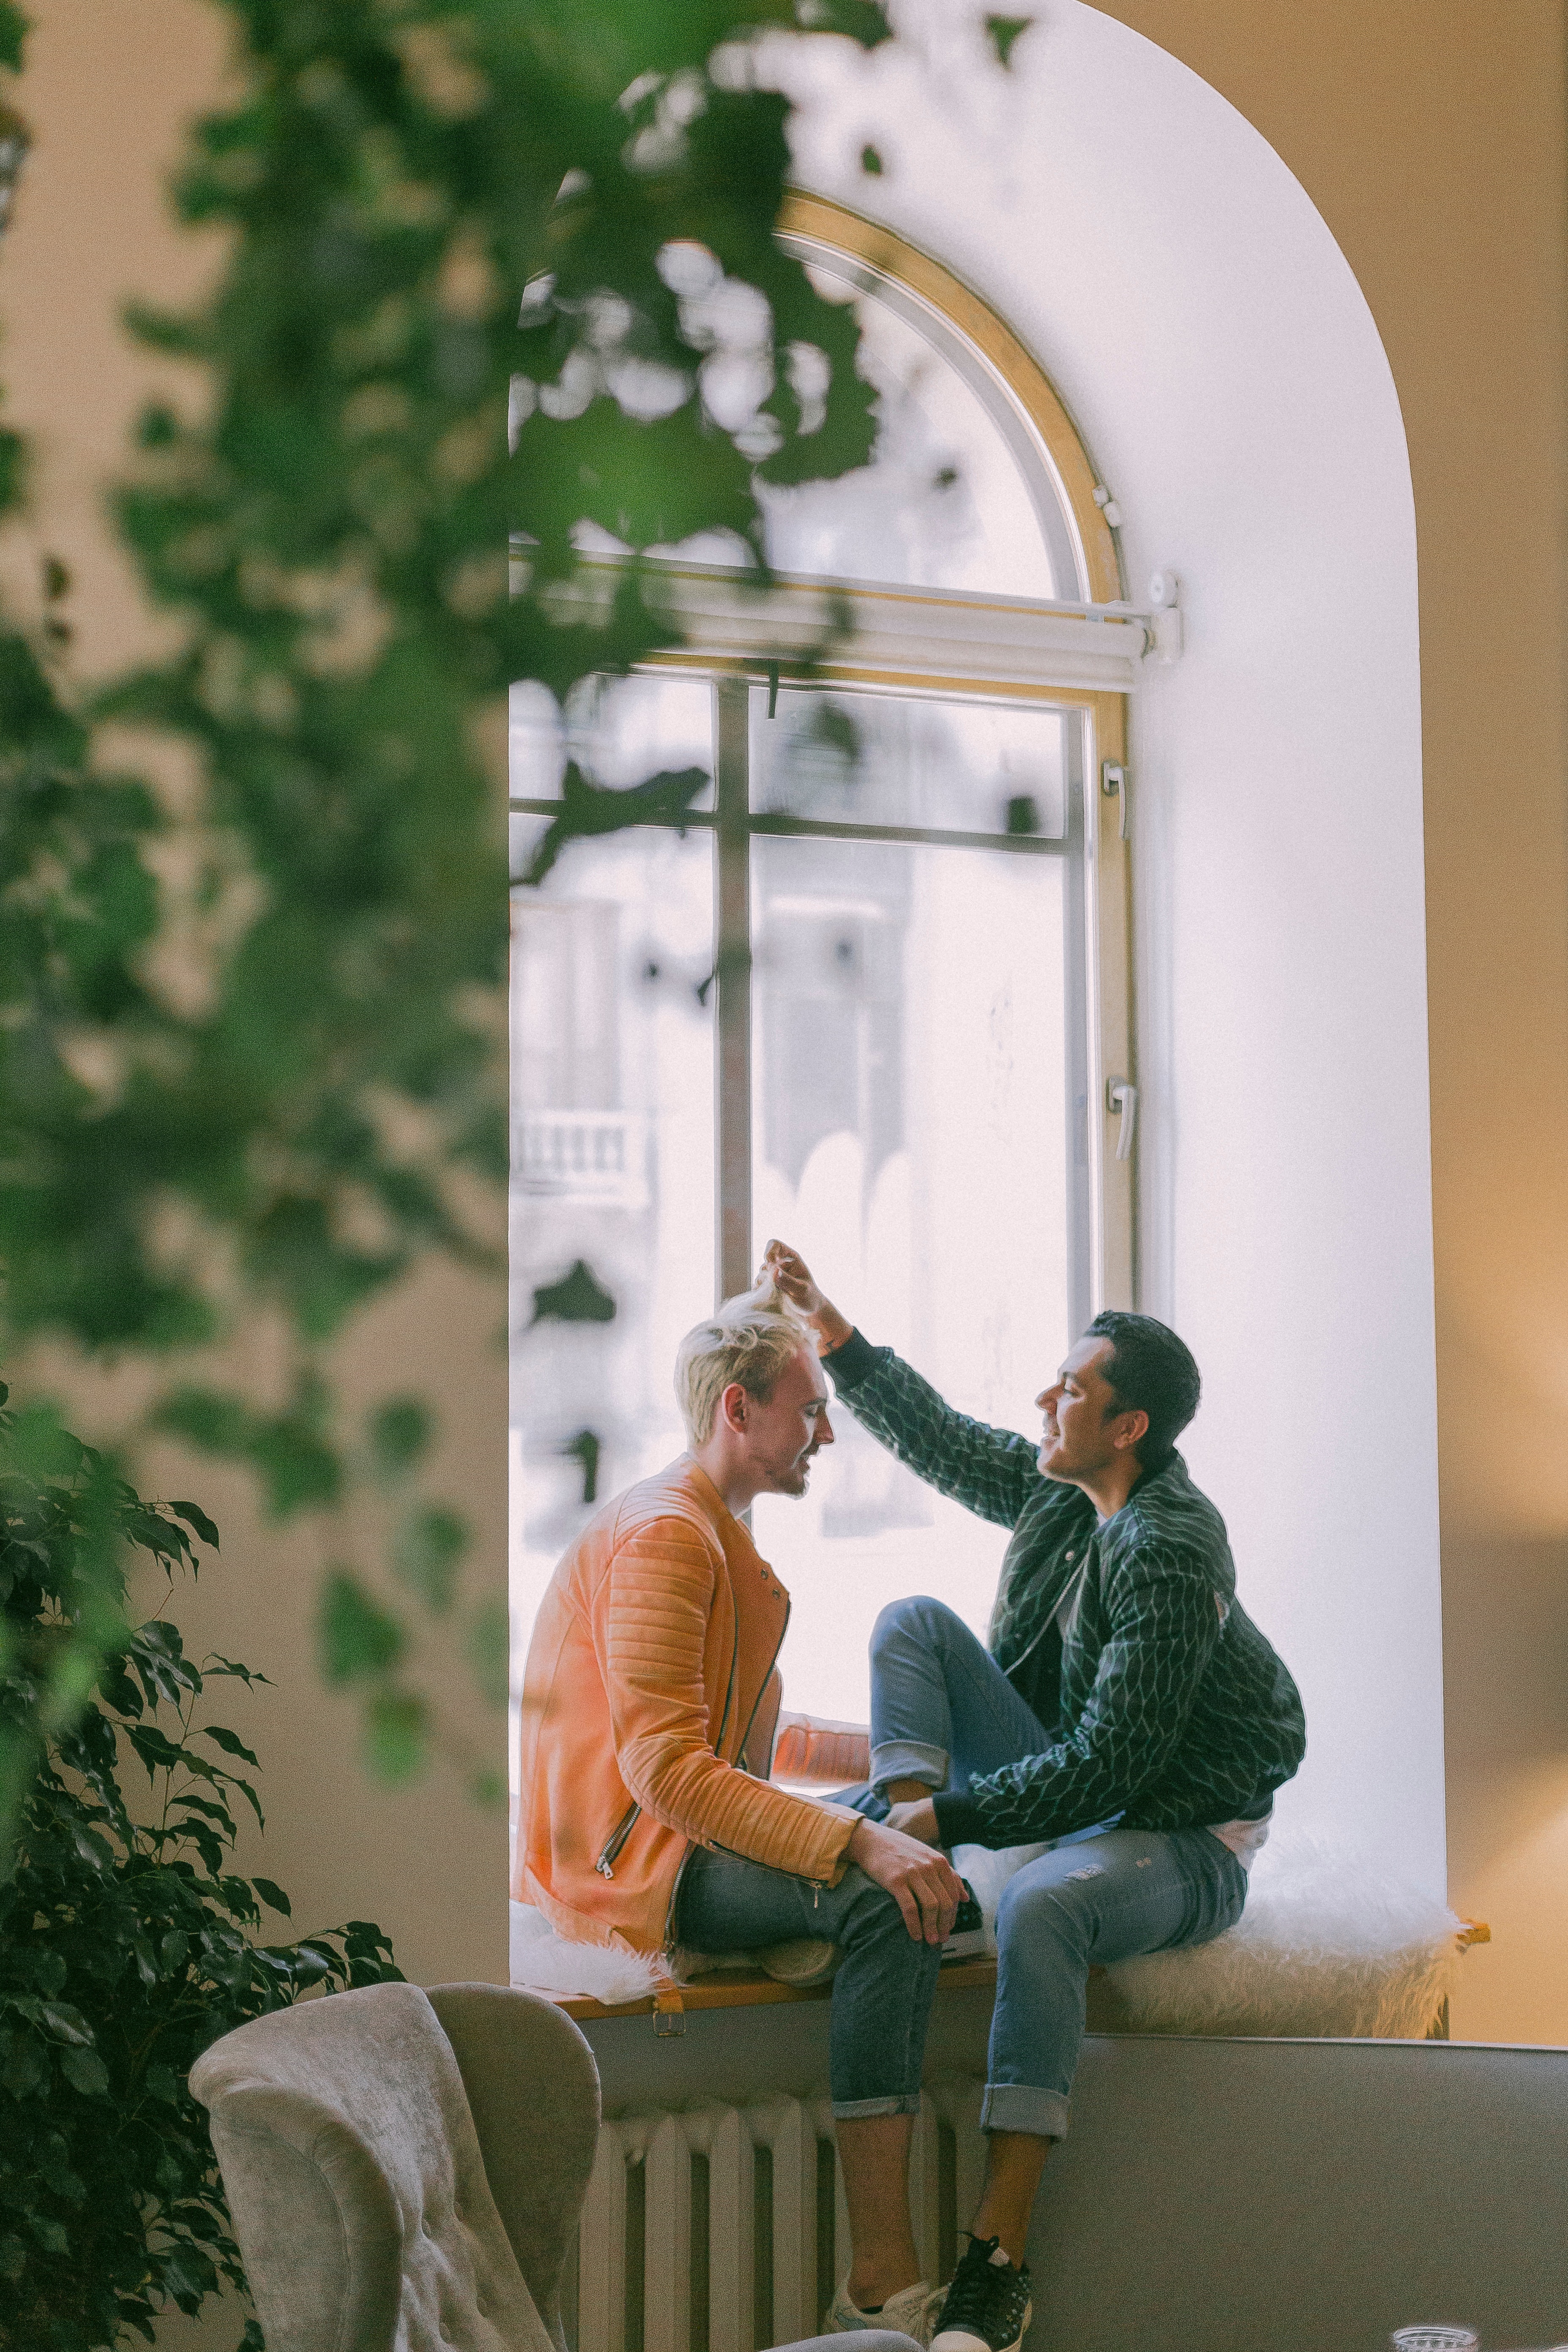 An image of two men, one is touching the other's hair and looking at the other with a sense of love and understanding. The image represents the importance of LGBTQ relationships and the need for support and guidance in navigating the challenges that can arise. The image promotes the idea of seeking LGBTQ therapy, where individuals and couples can find a safe and supportive environment to explore their emotions and work towards building healthier relationships. The image evokes a sense of intimacy, trust, and the importance of connecting with others who share similar experiences.